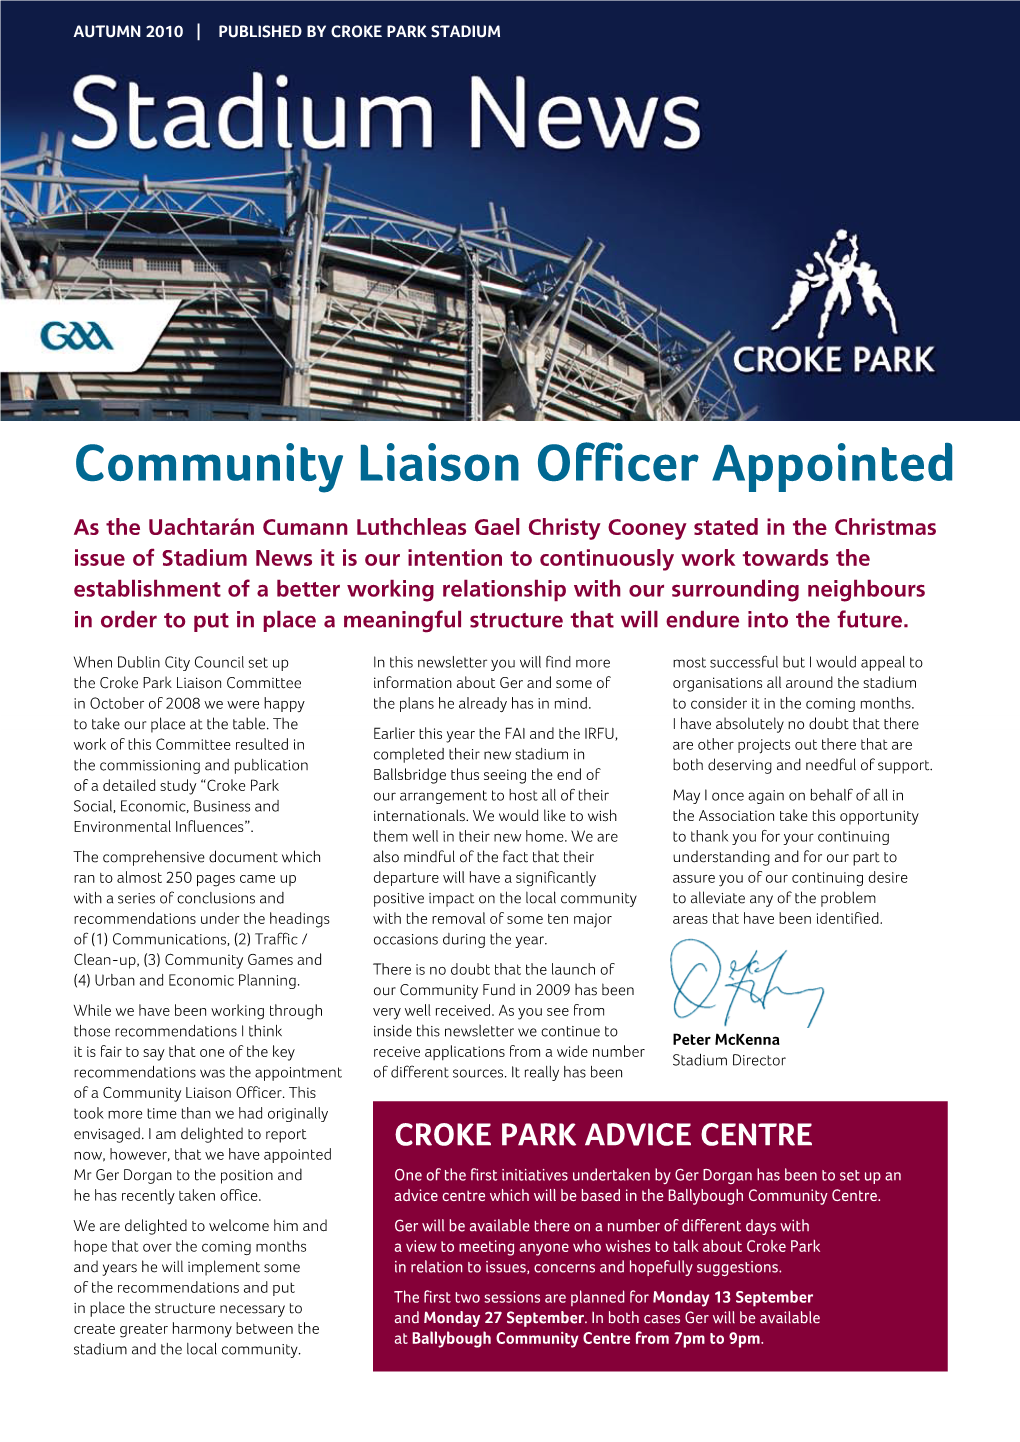 Community Liaison Officer Appointed